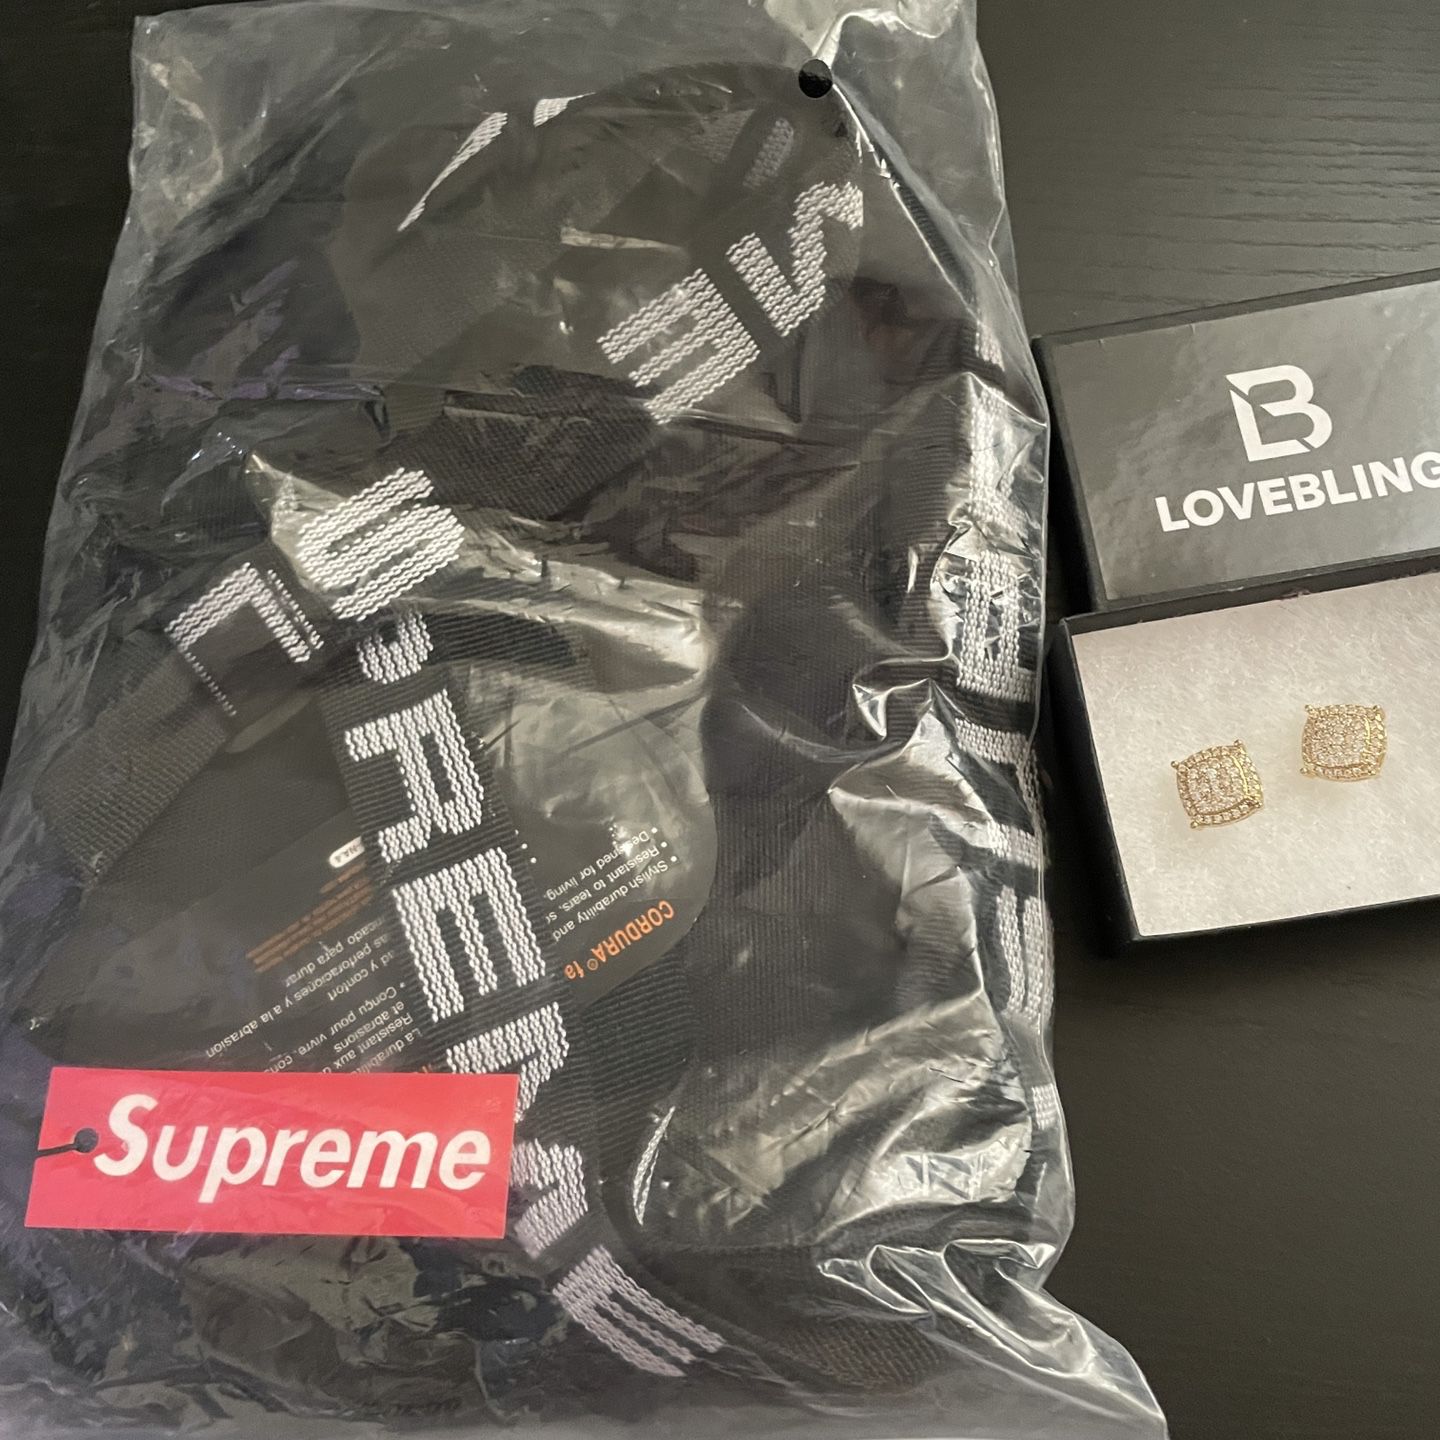 Supreme Bag and Gold LoveBling Earrings 2 Piece